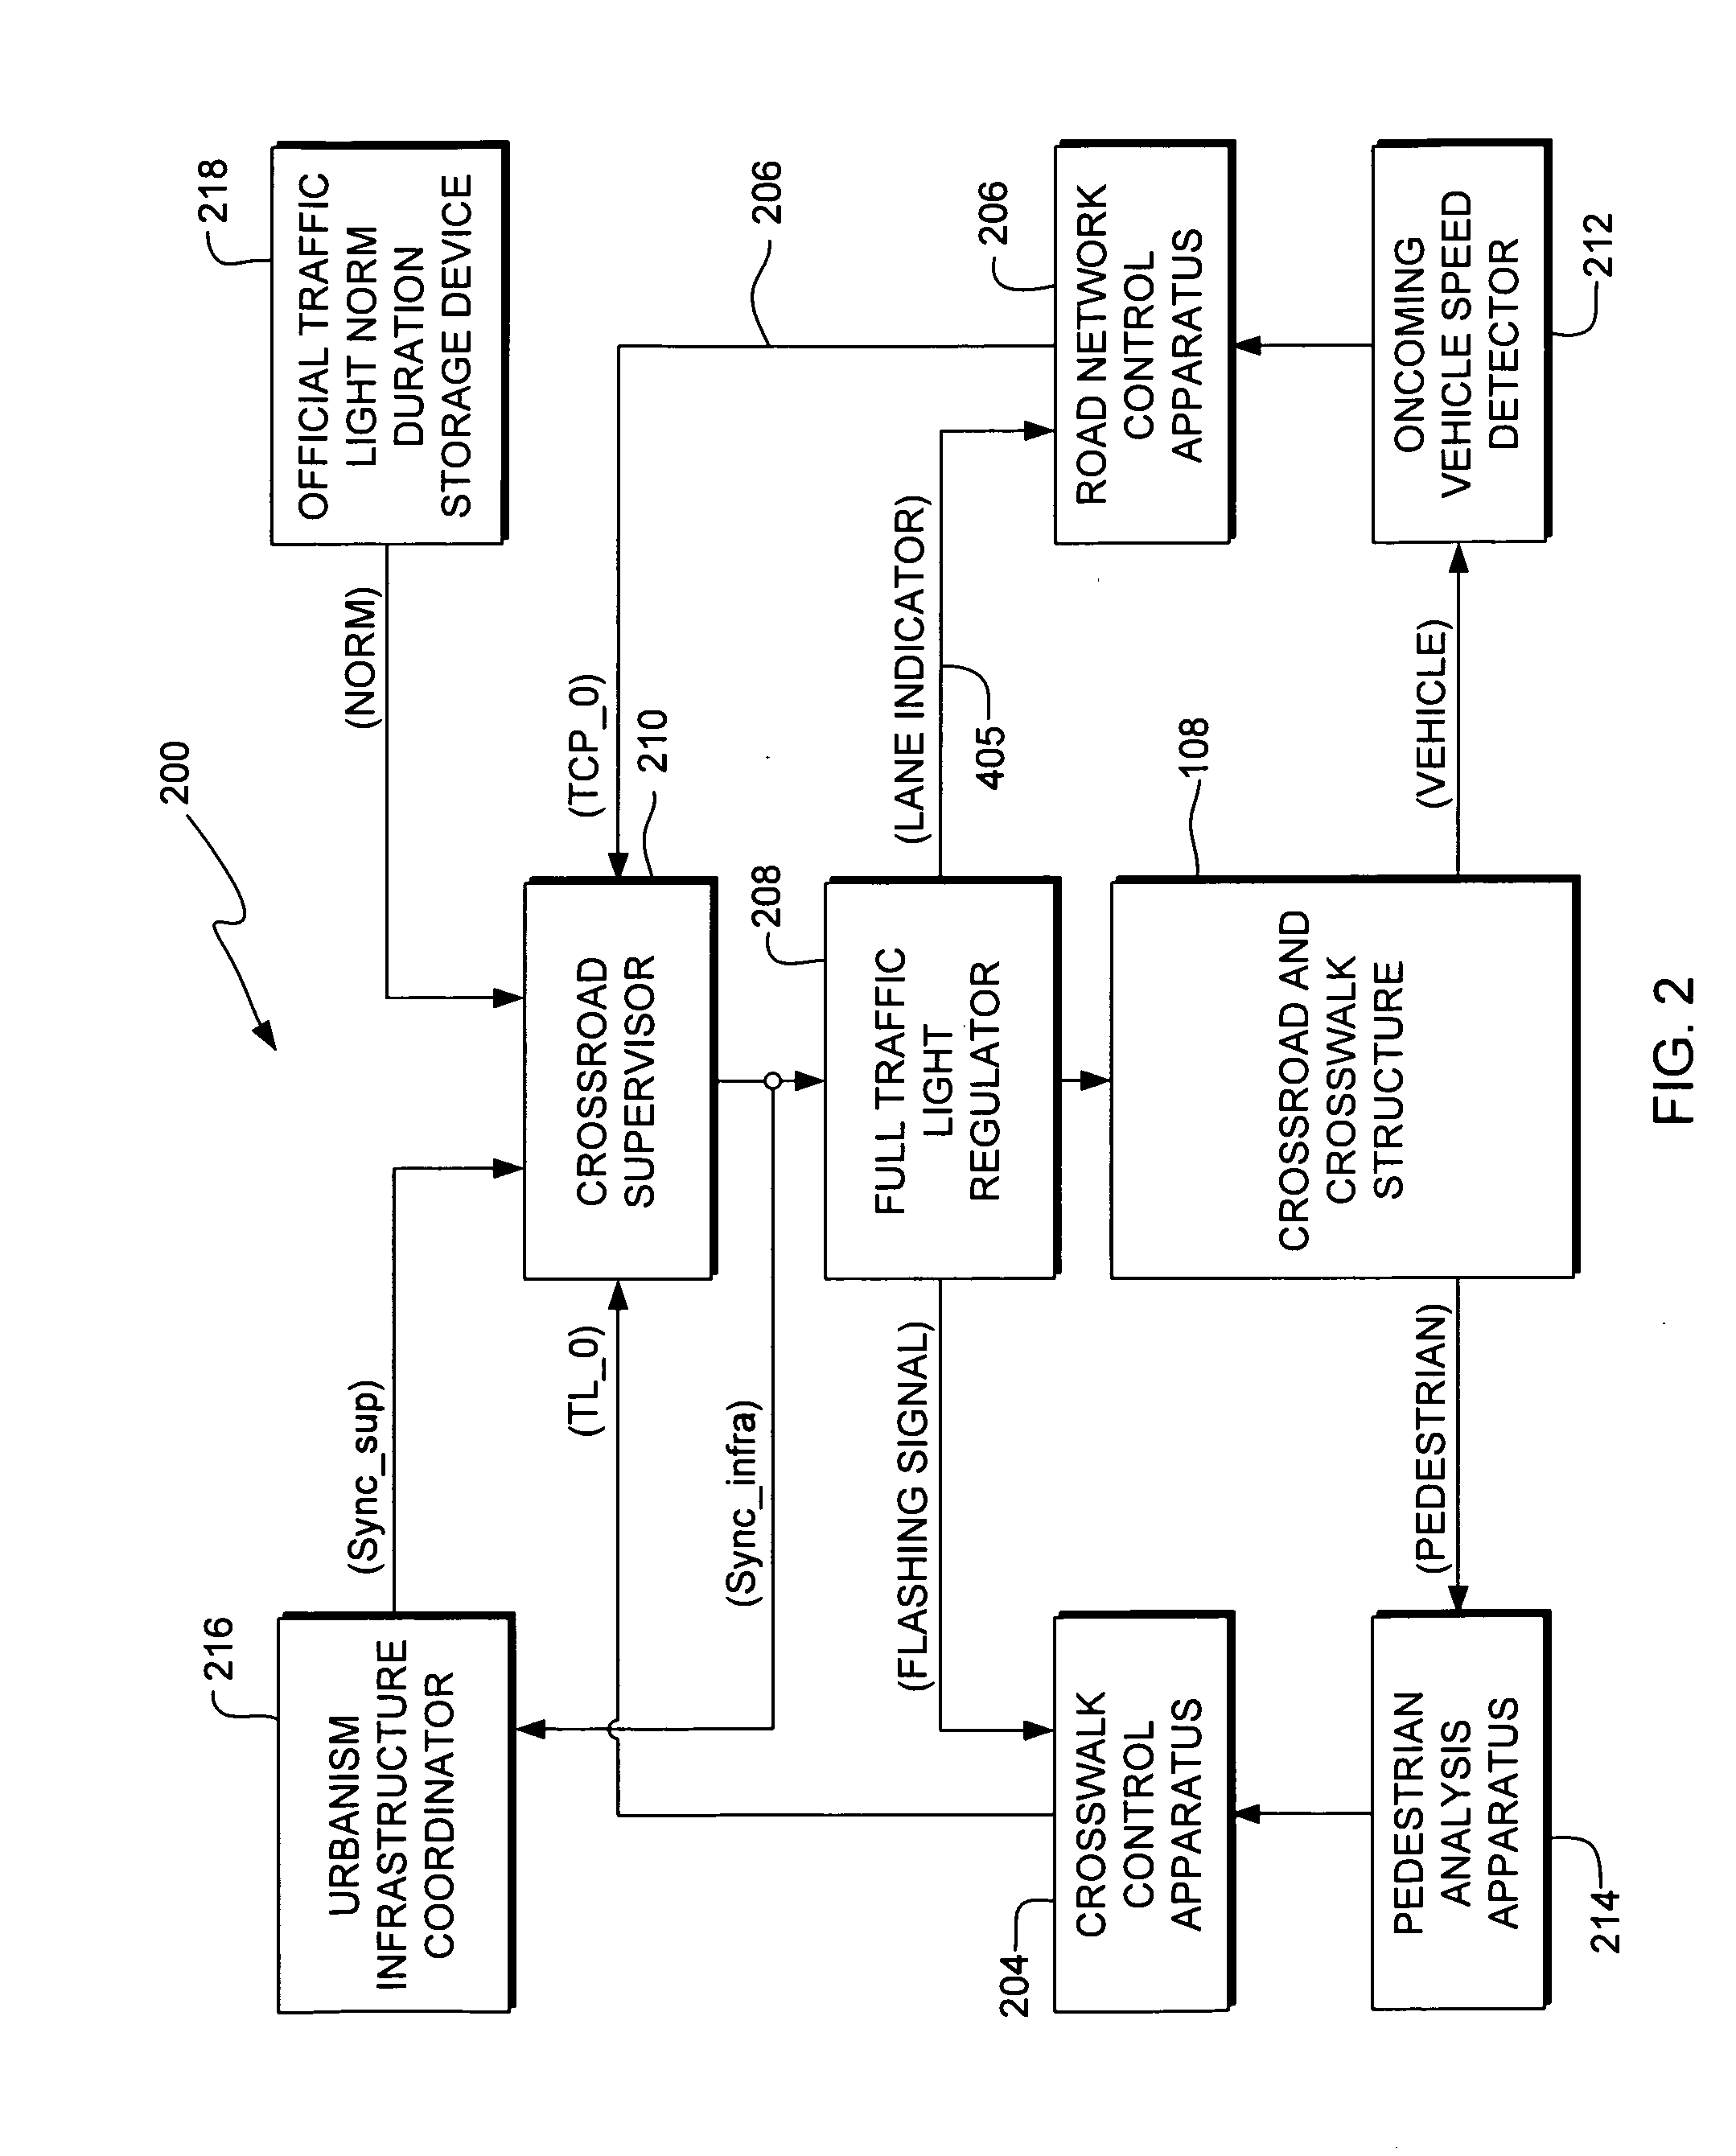 System and method for automatically adjusting traffic light